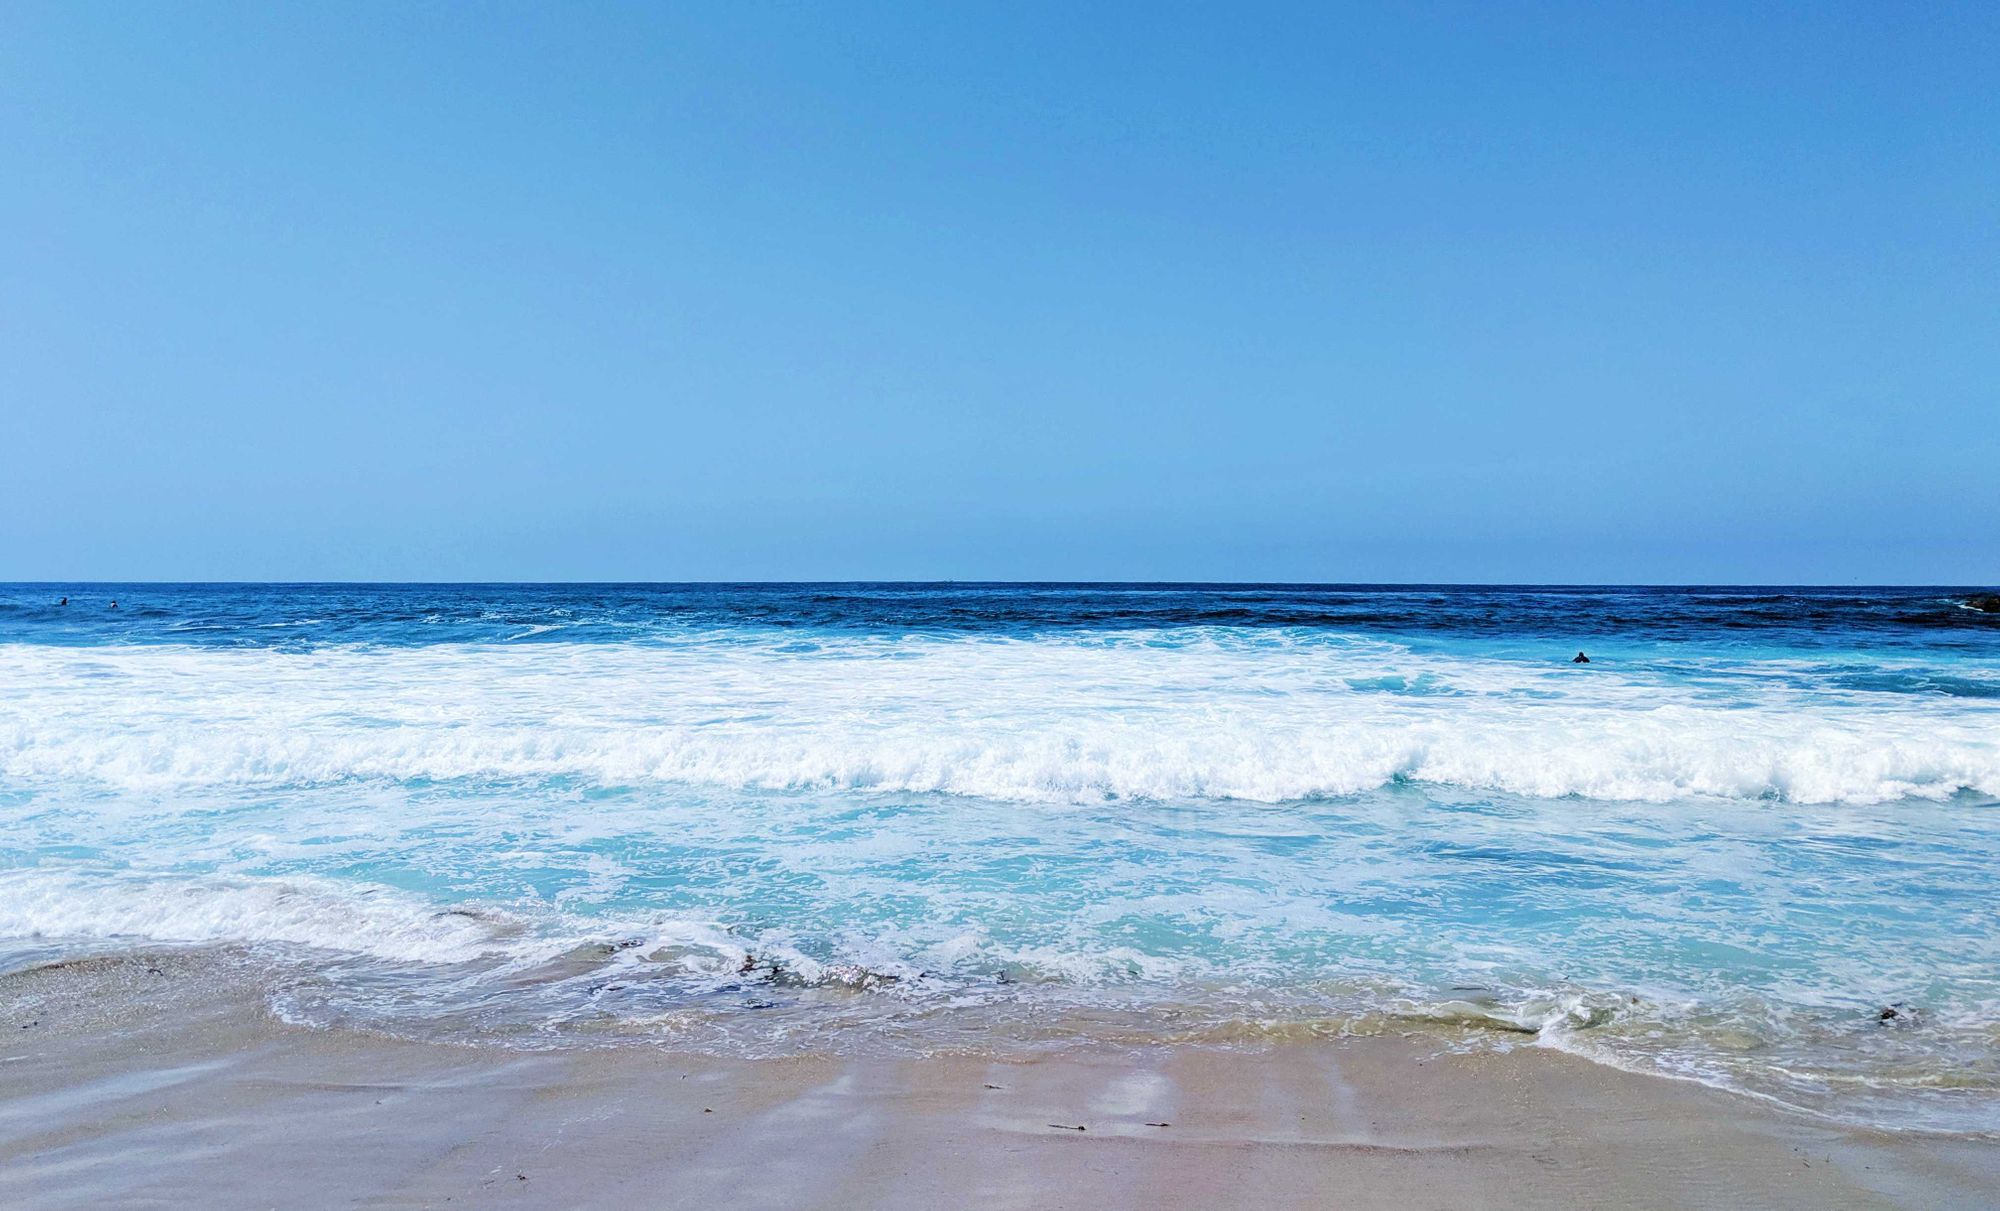 A photo of blues skies, ocean waves and wet beach sand